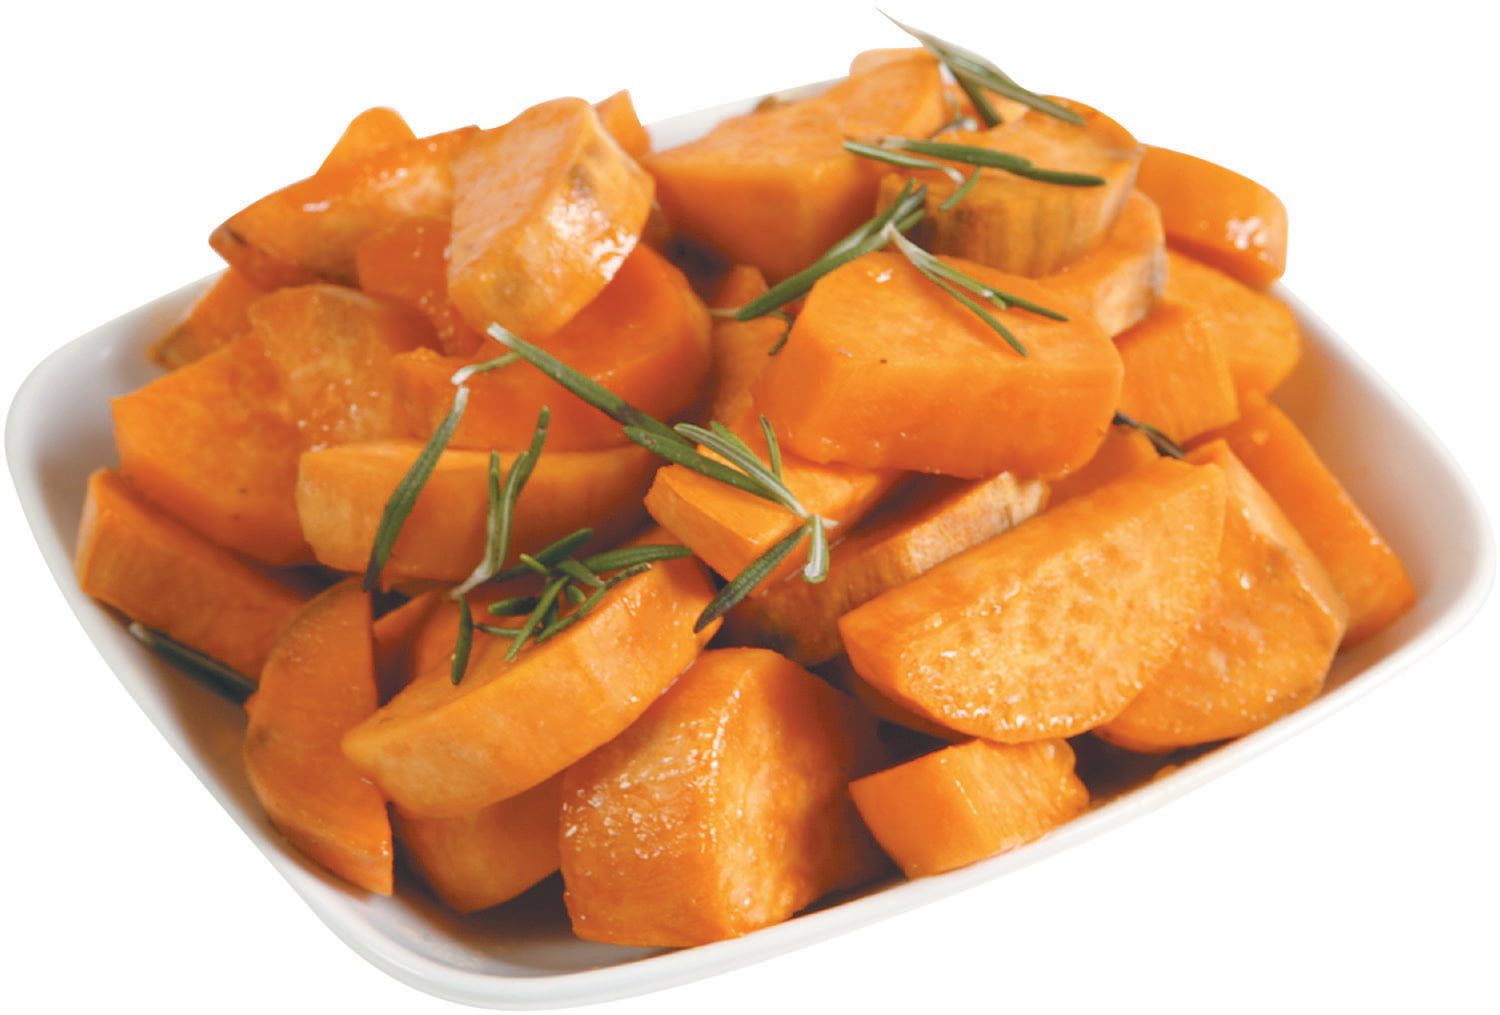 Cooked Sweet Potatoes in a Bowl Food Picture